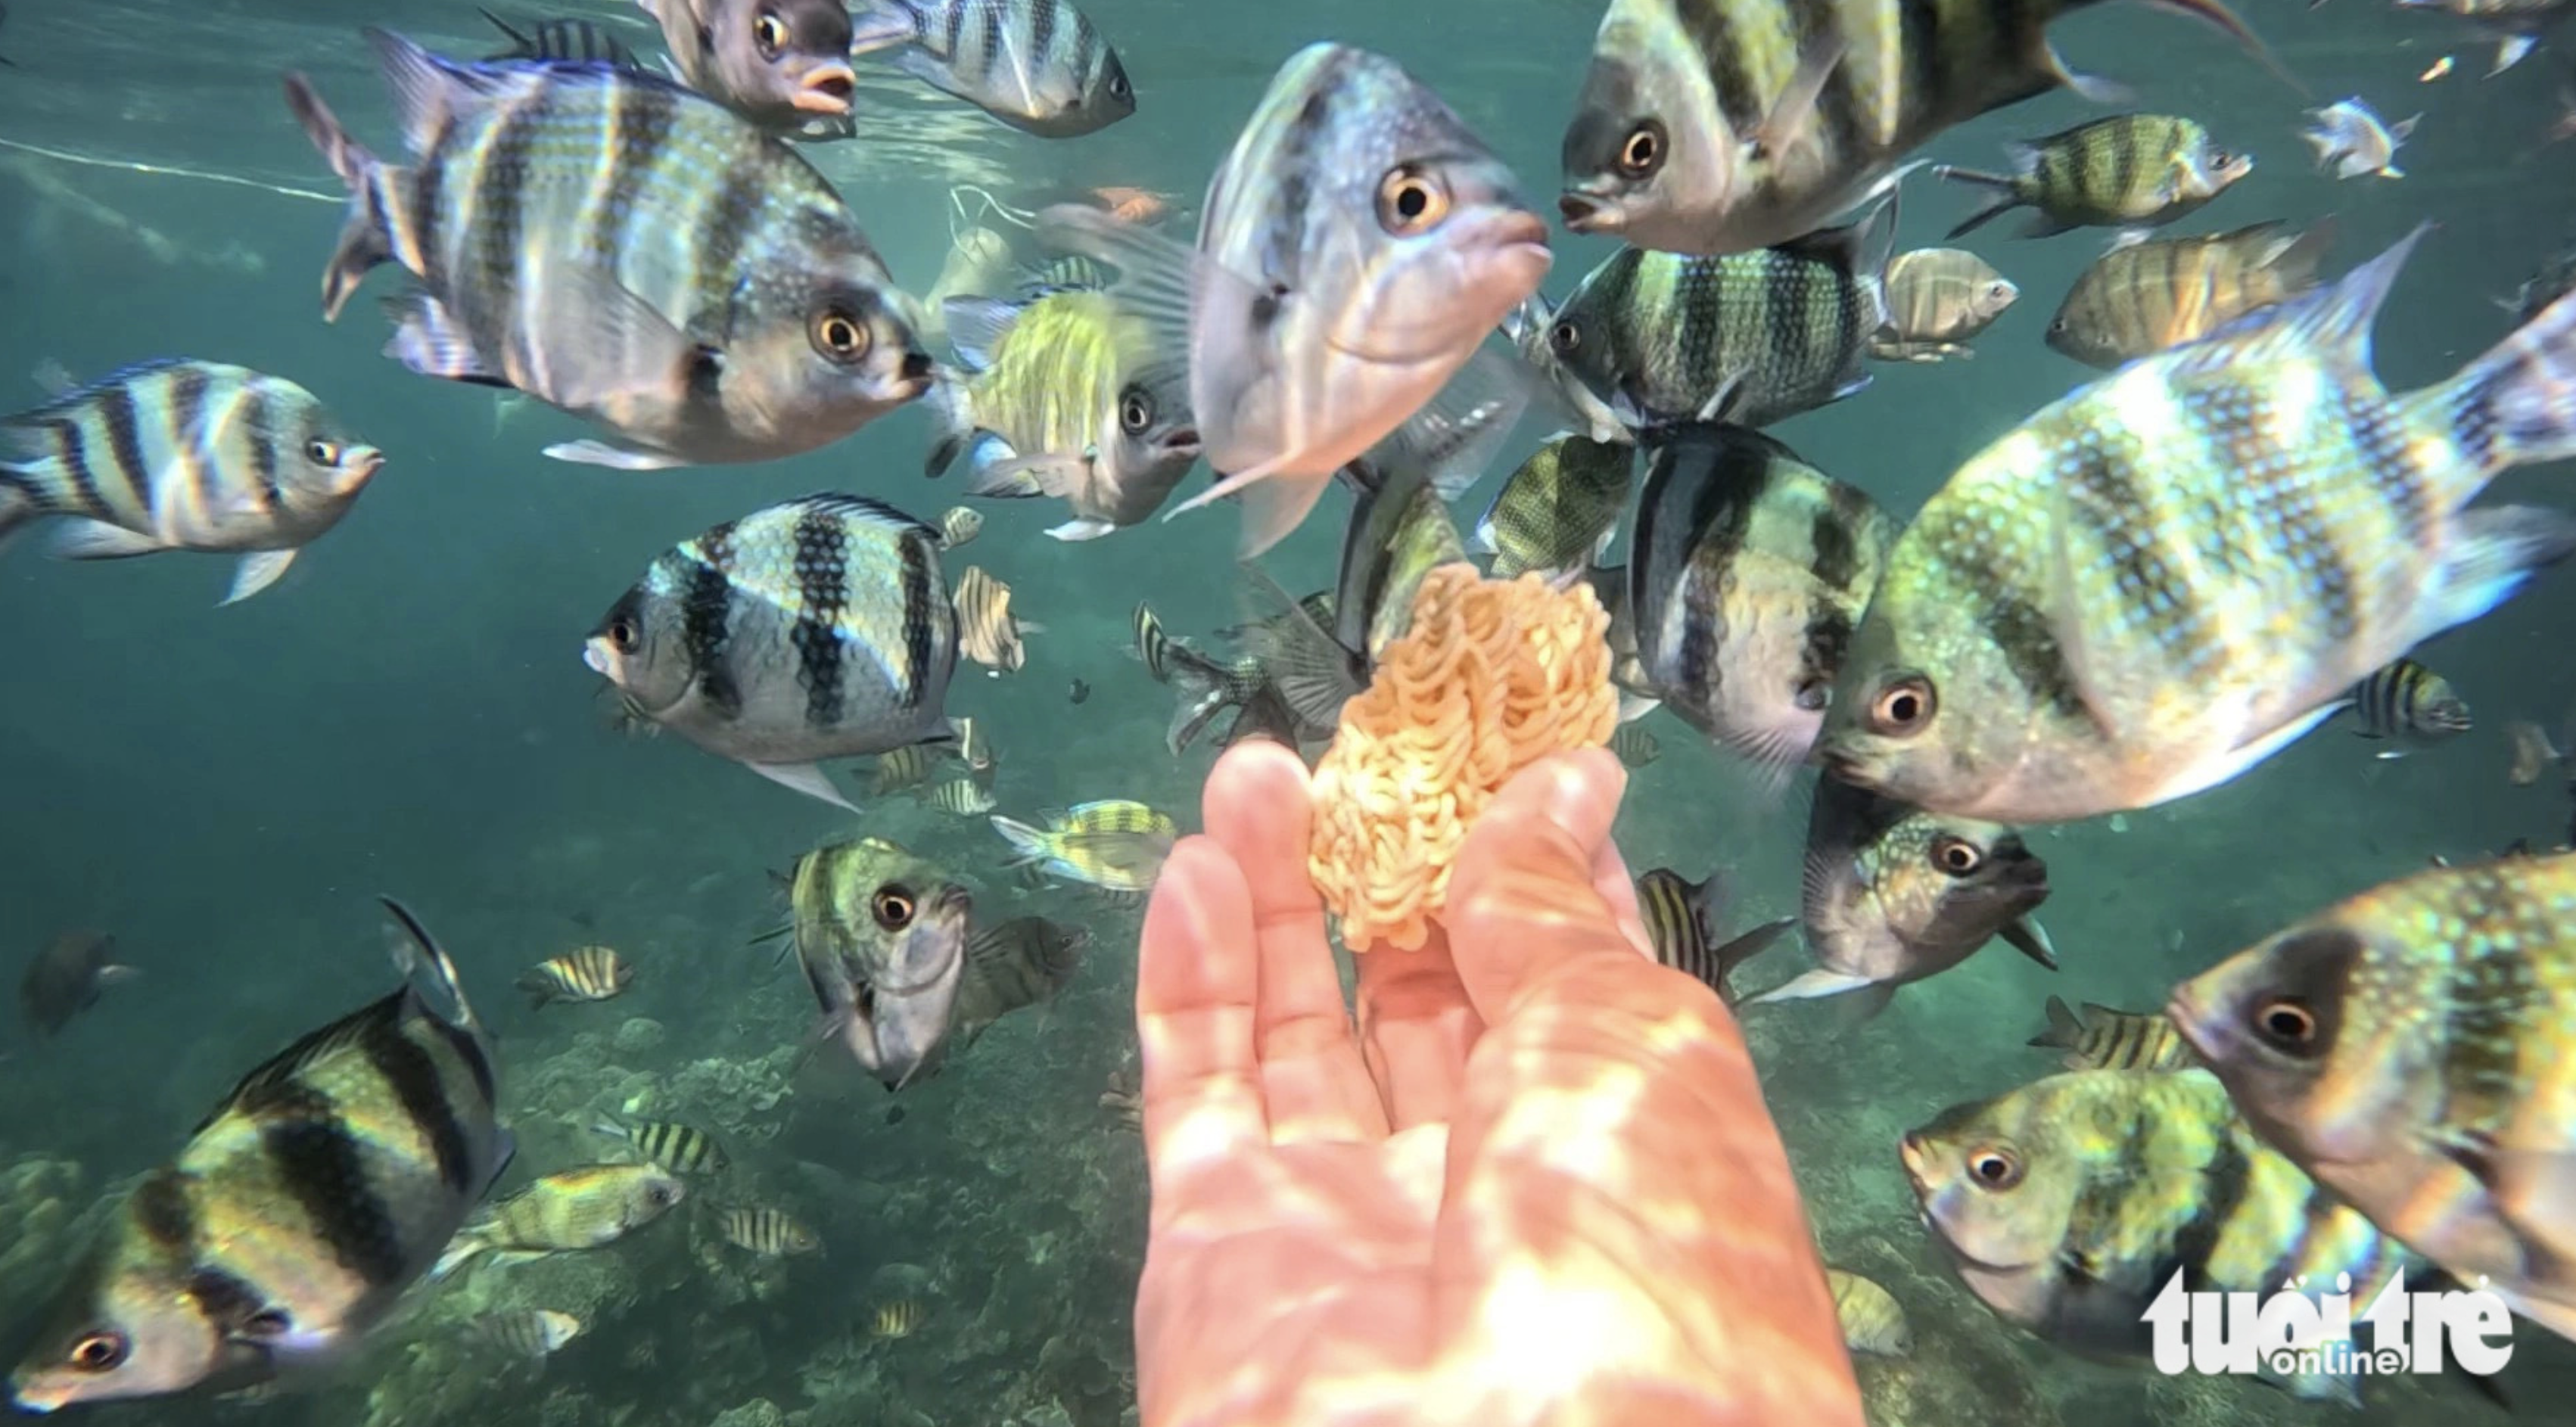 Tourists enamored with camping, feeding fish on Vietnam’s Phu Quoc Island